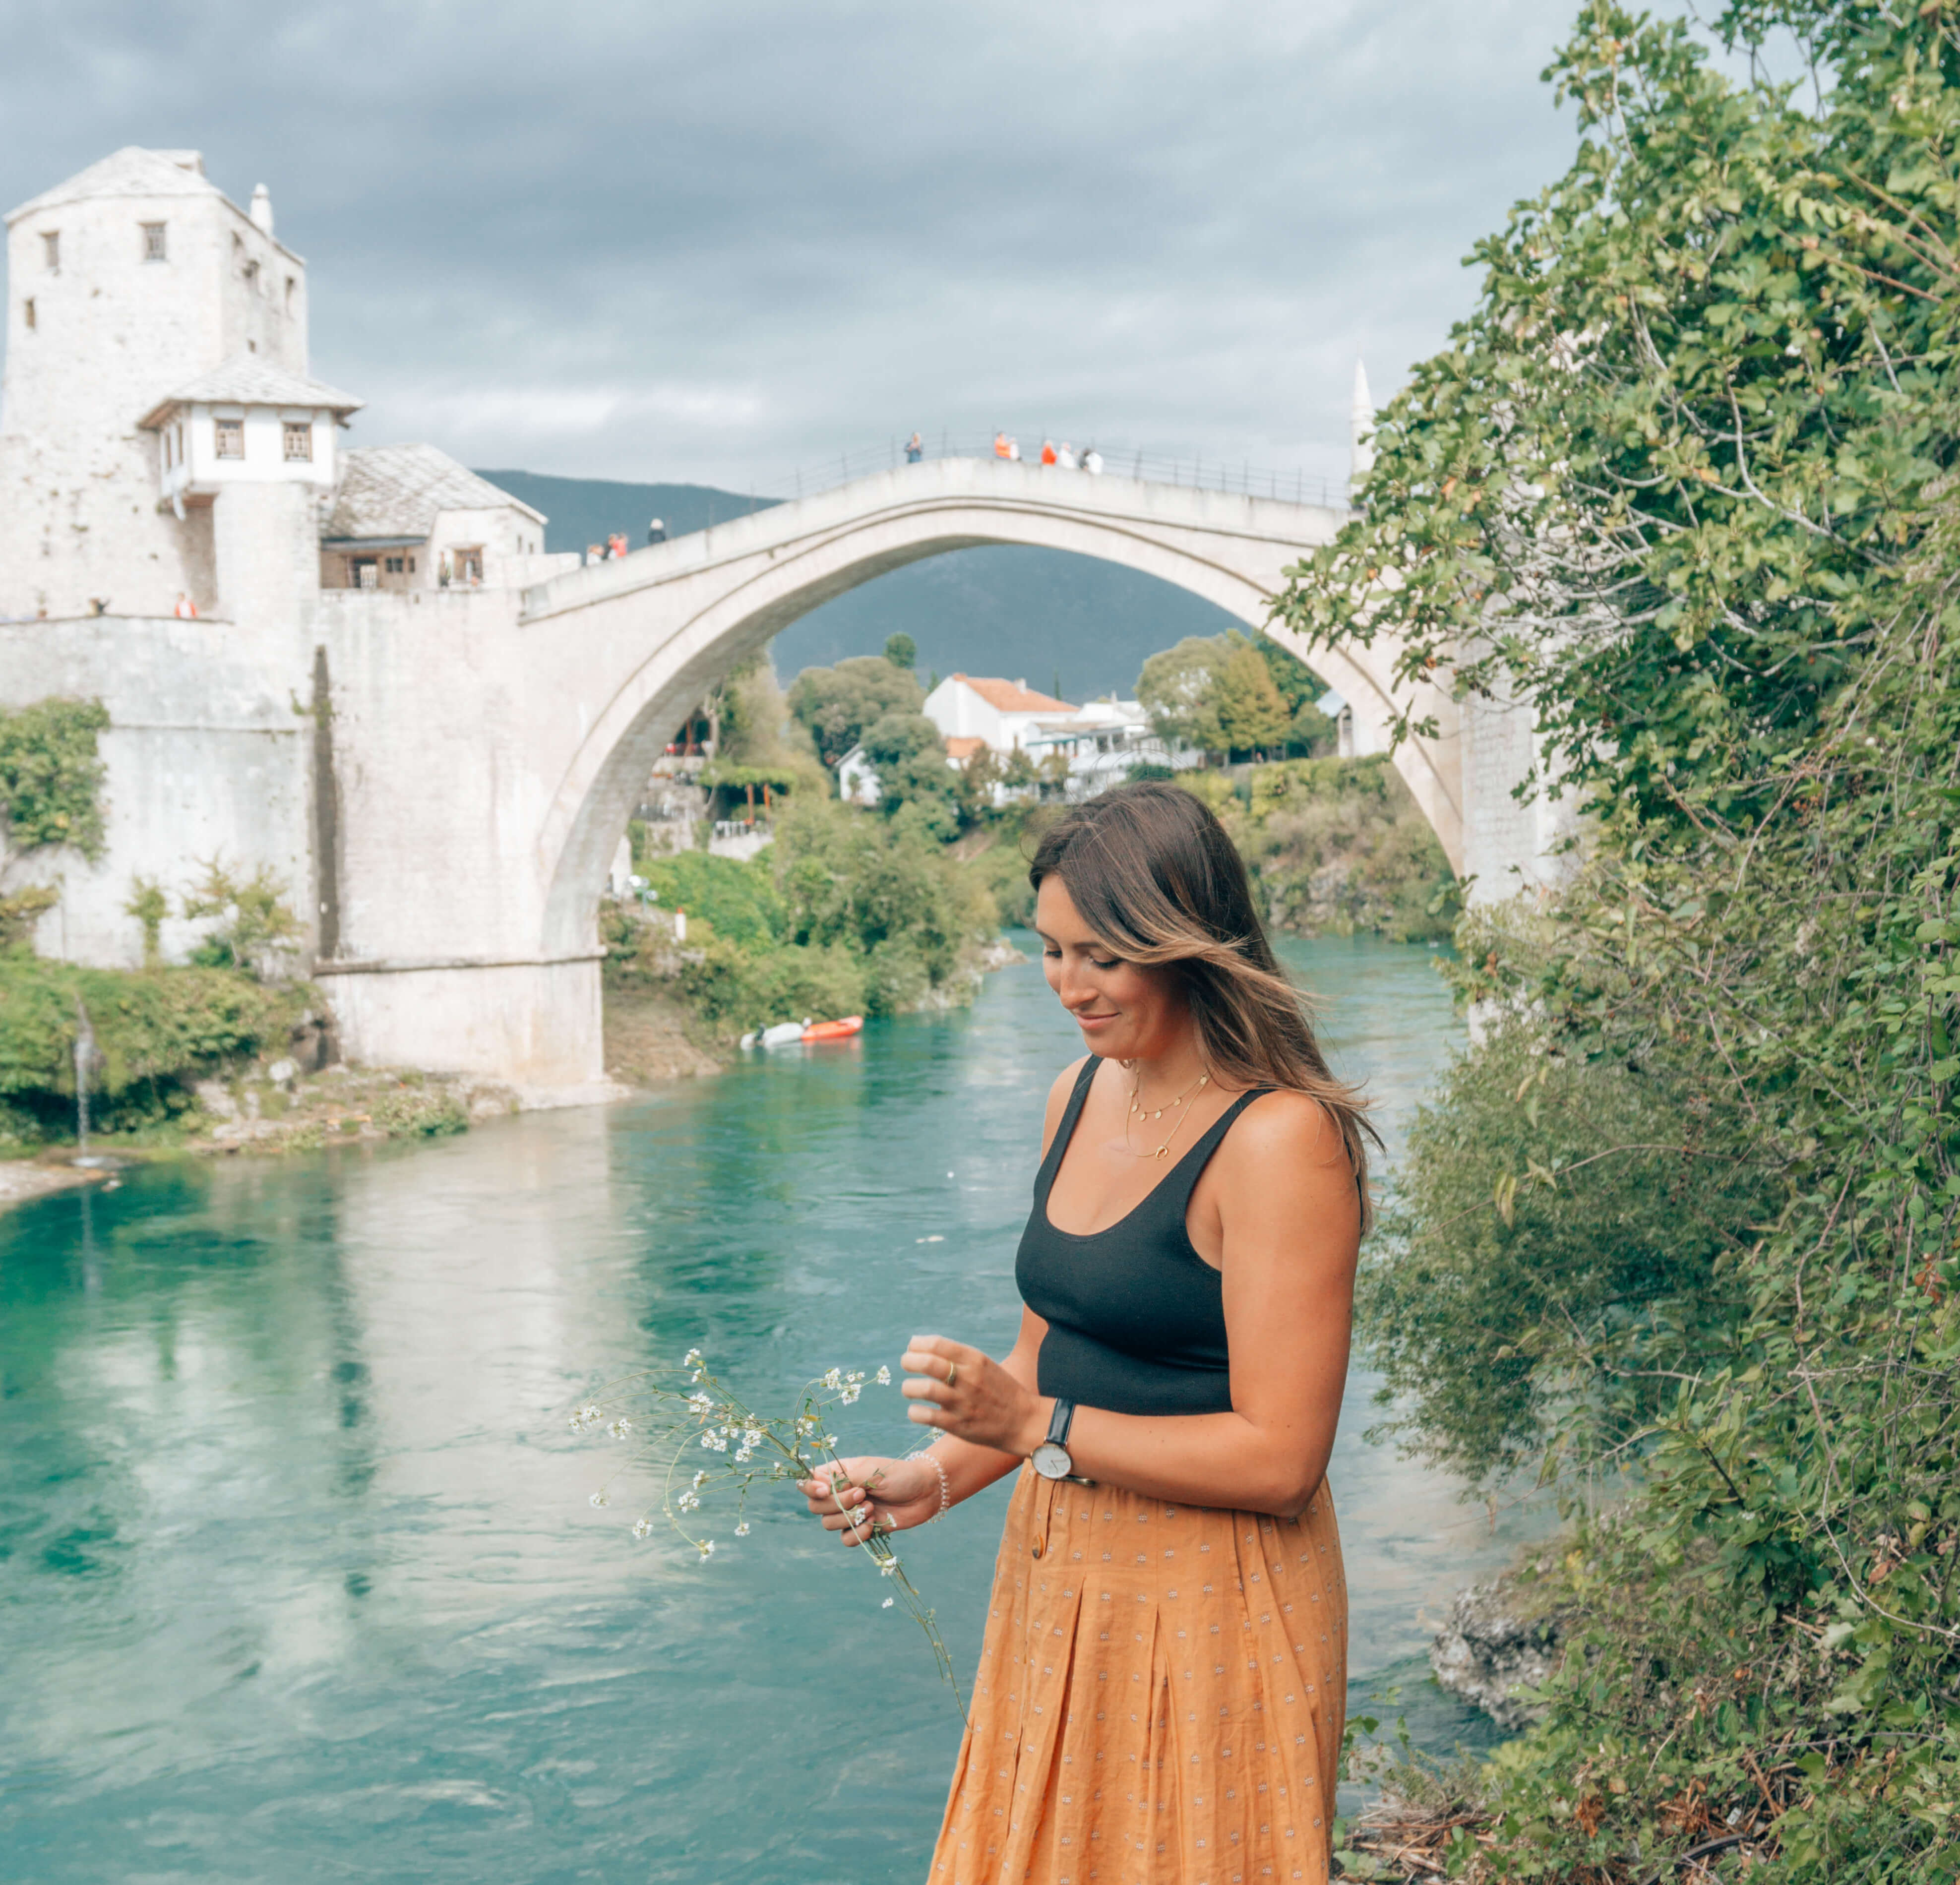 24 Hours in Mostar – Best Things to Do in Mostar, Bosnia and Herzegovina